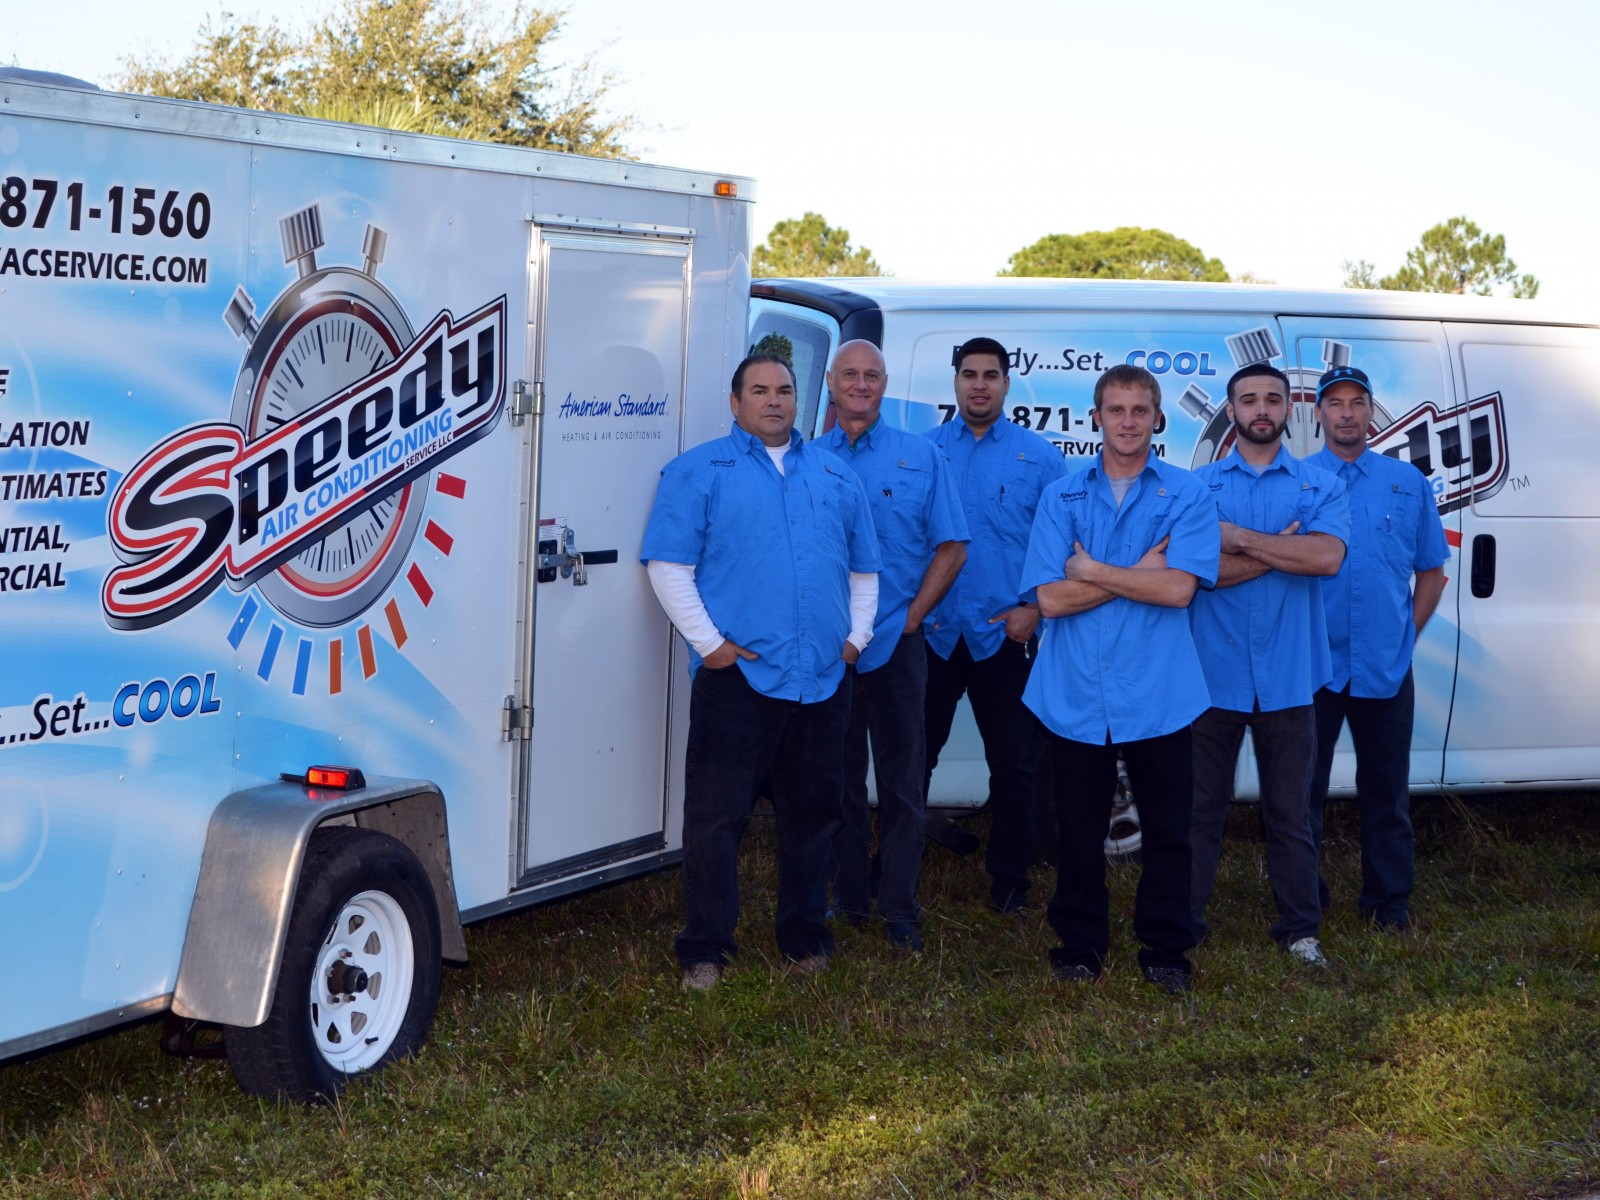 Speedy Air Conditioning Service has qualified technicians who aim to provide quality air conditioning repair for Vero Beach, FL.